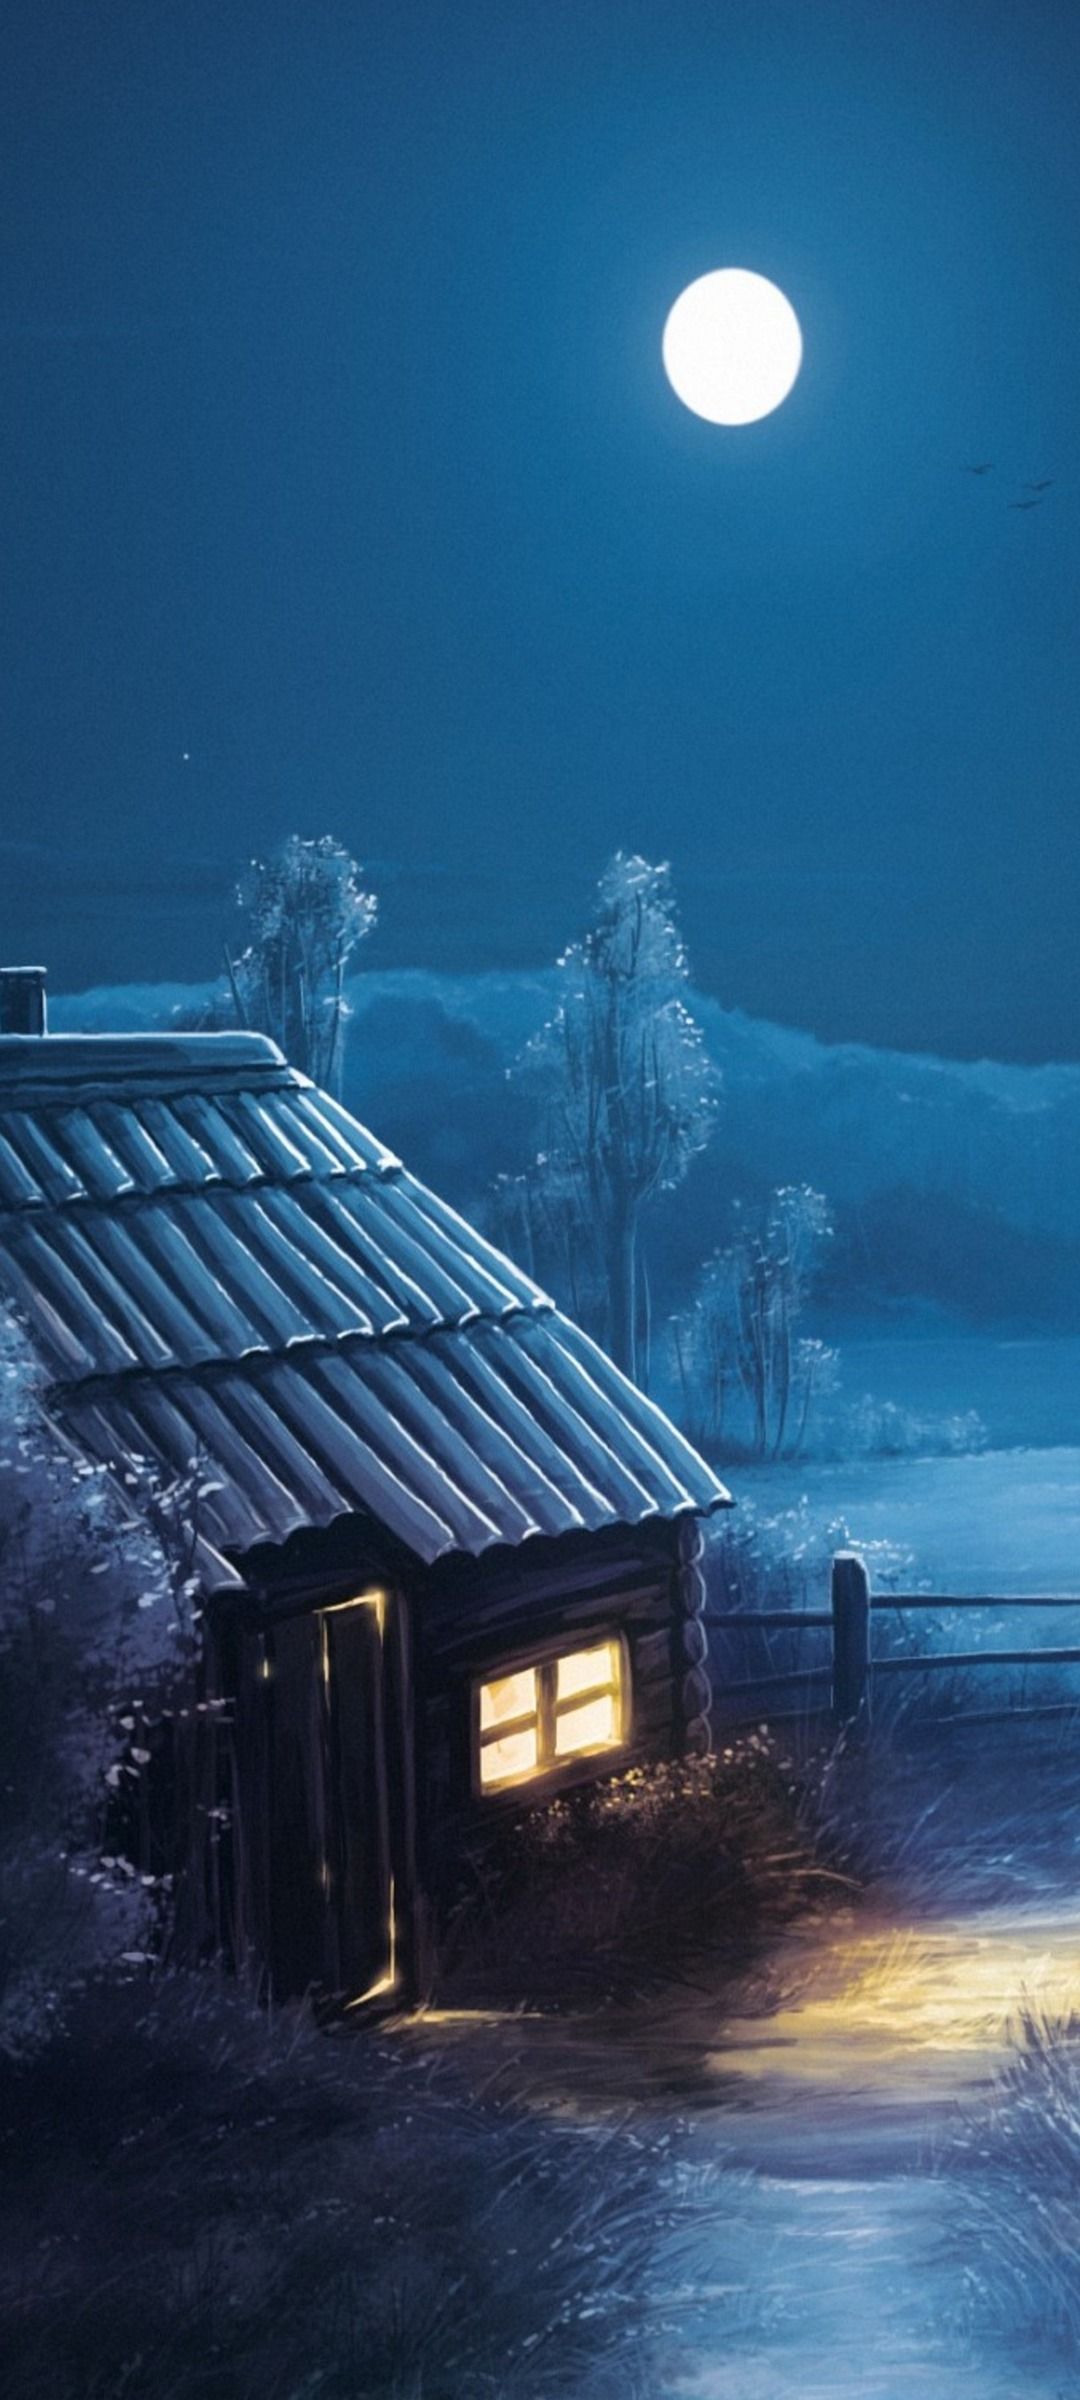 A painting of an old cabin at night - 1080x2400